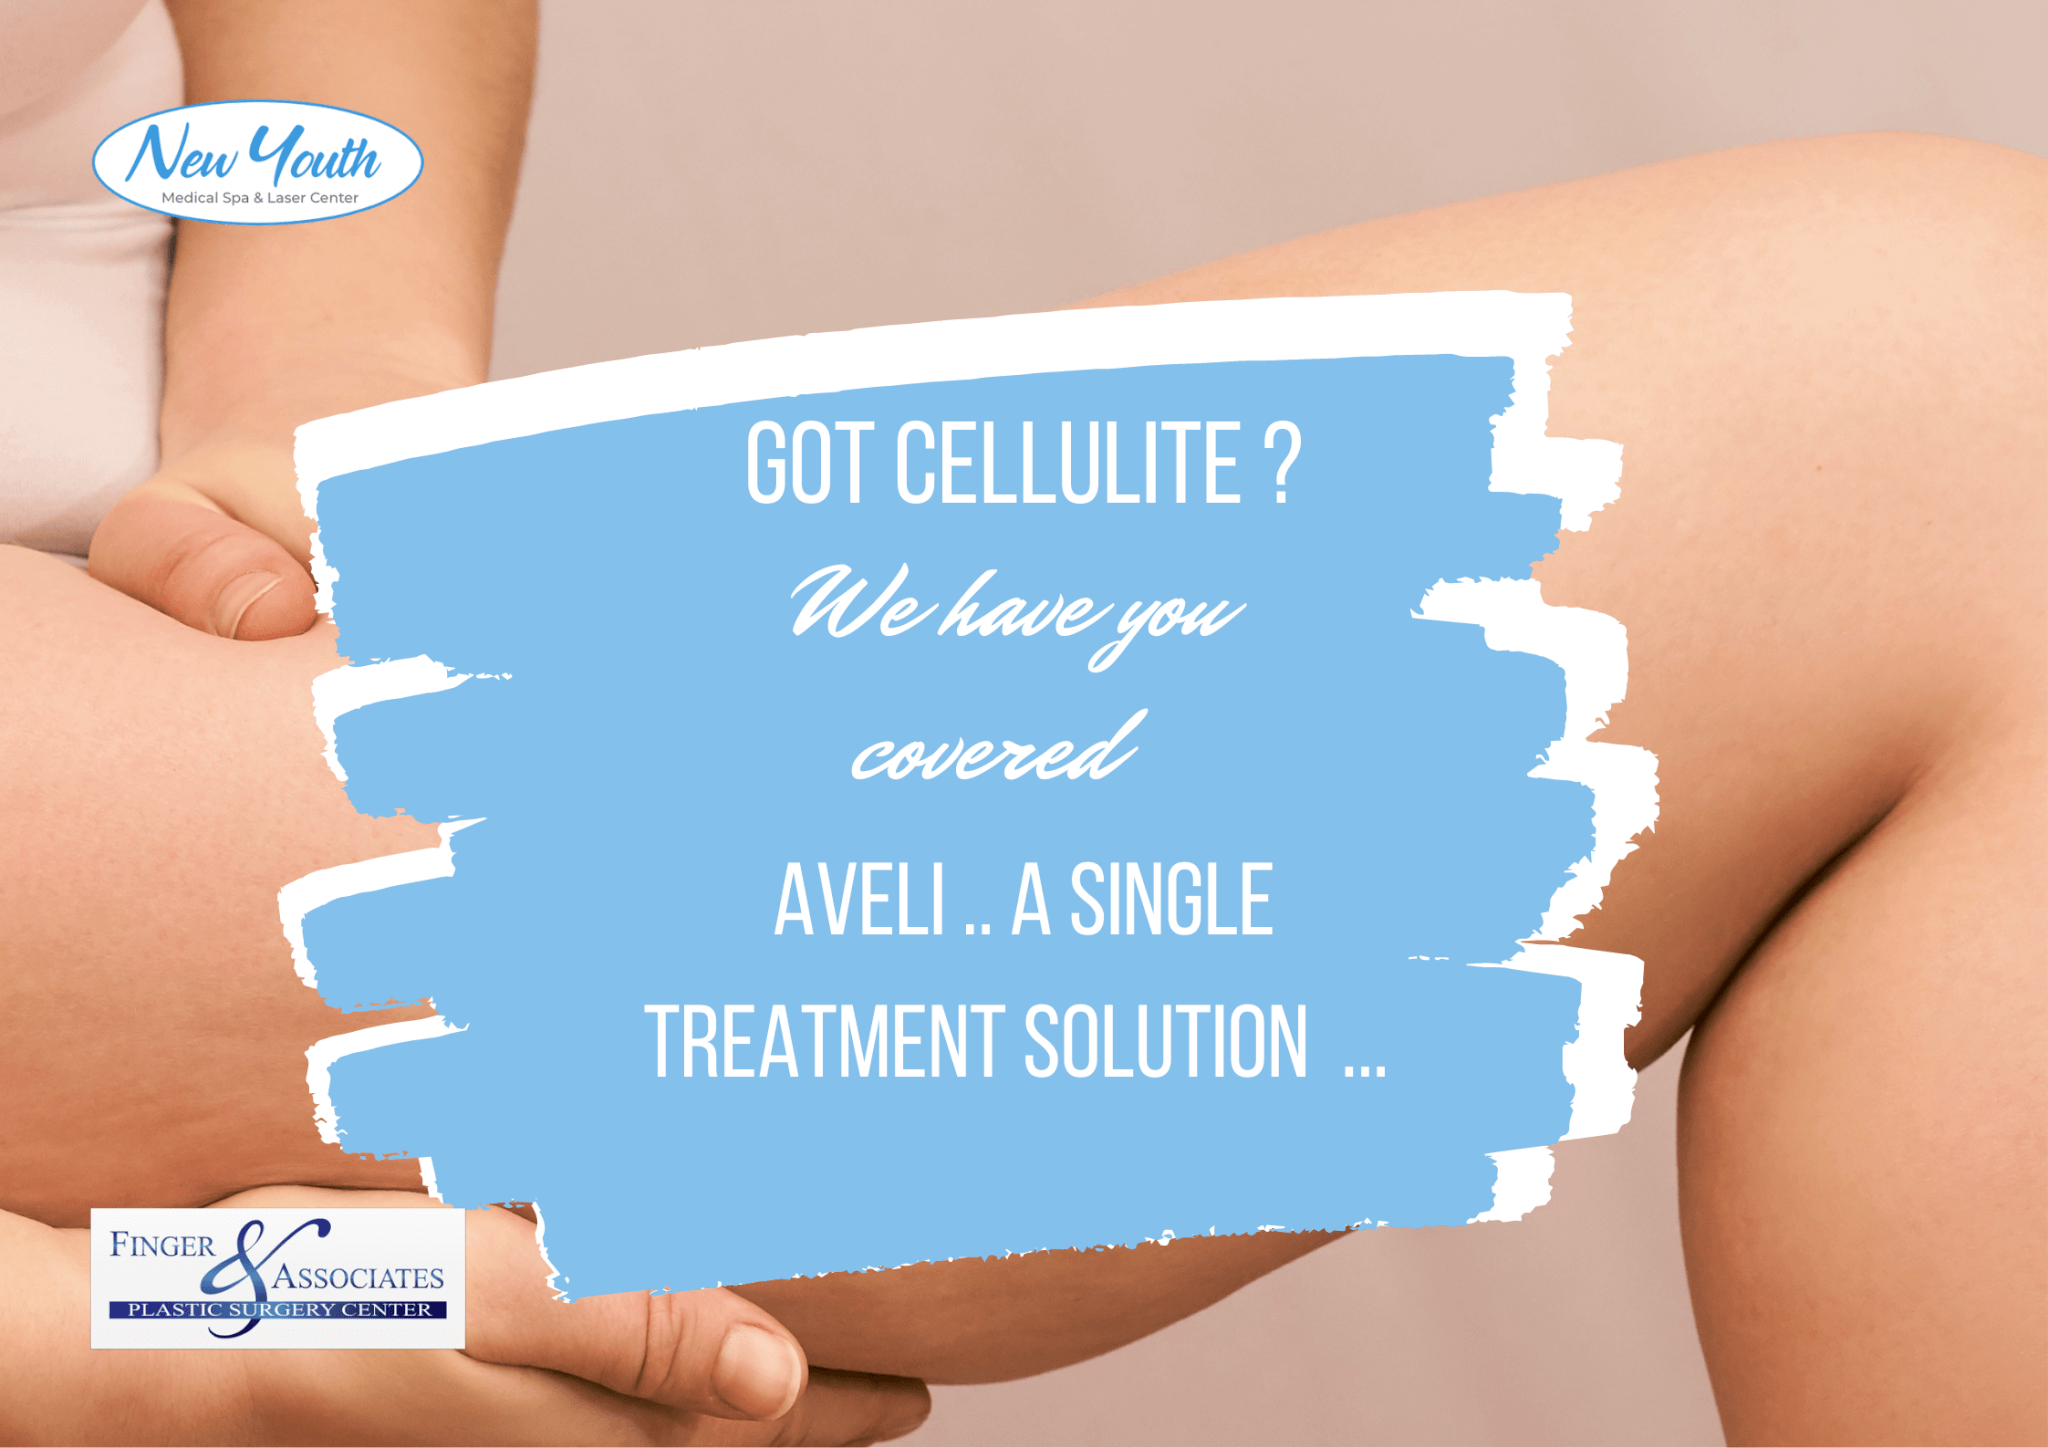 aveli a single treatment solution for cellulite now in Savannah